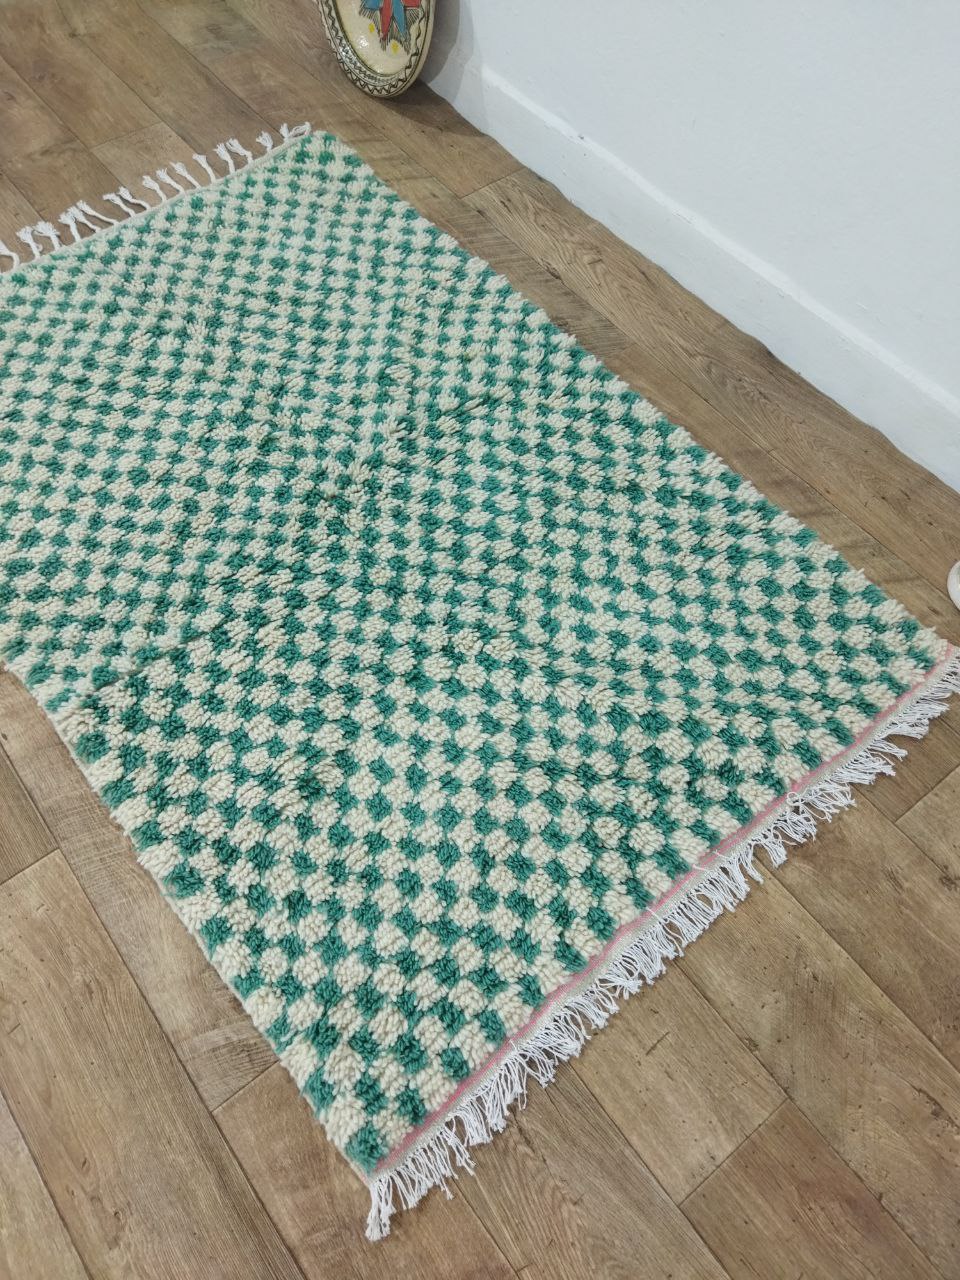 Elevate your space with our stunning Green and white checkered rug from Morocco. Handmade by Berber artisans, available in various sizes. Add luxury and sophistication to your home decor.